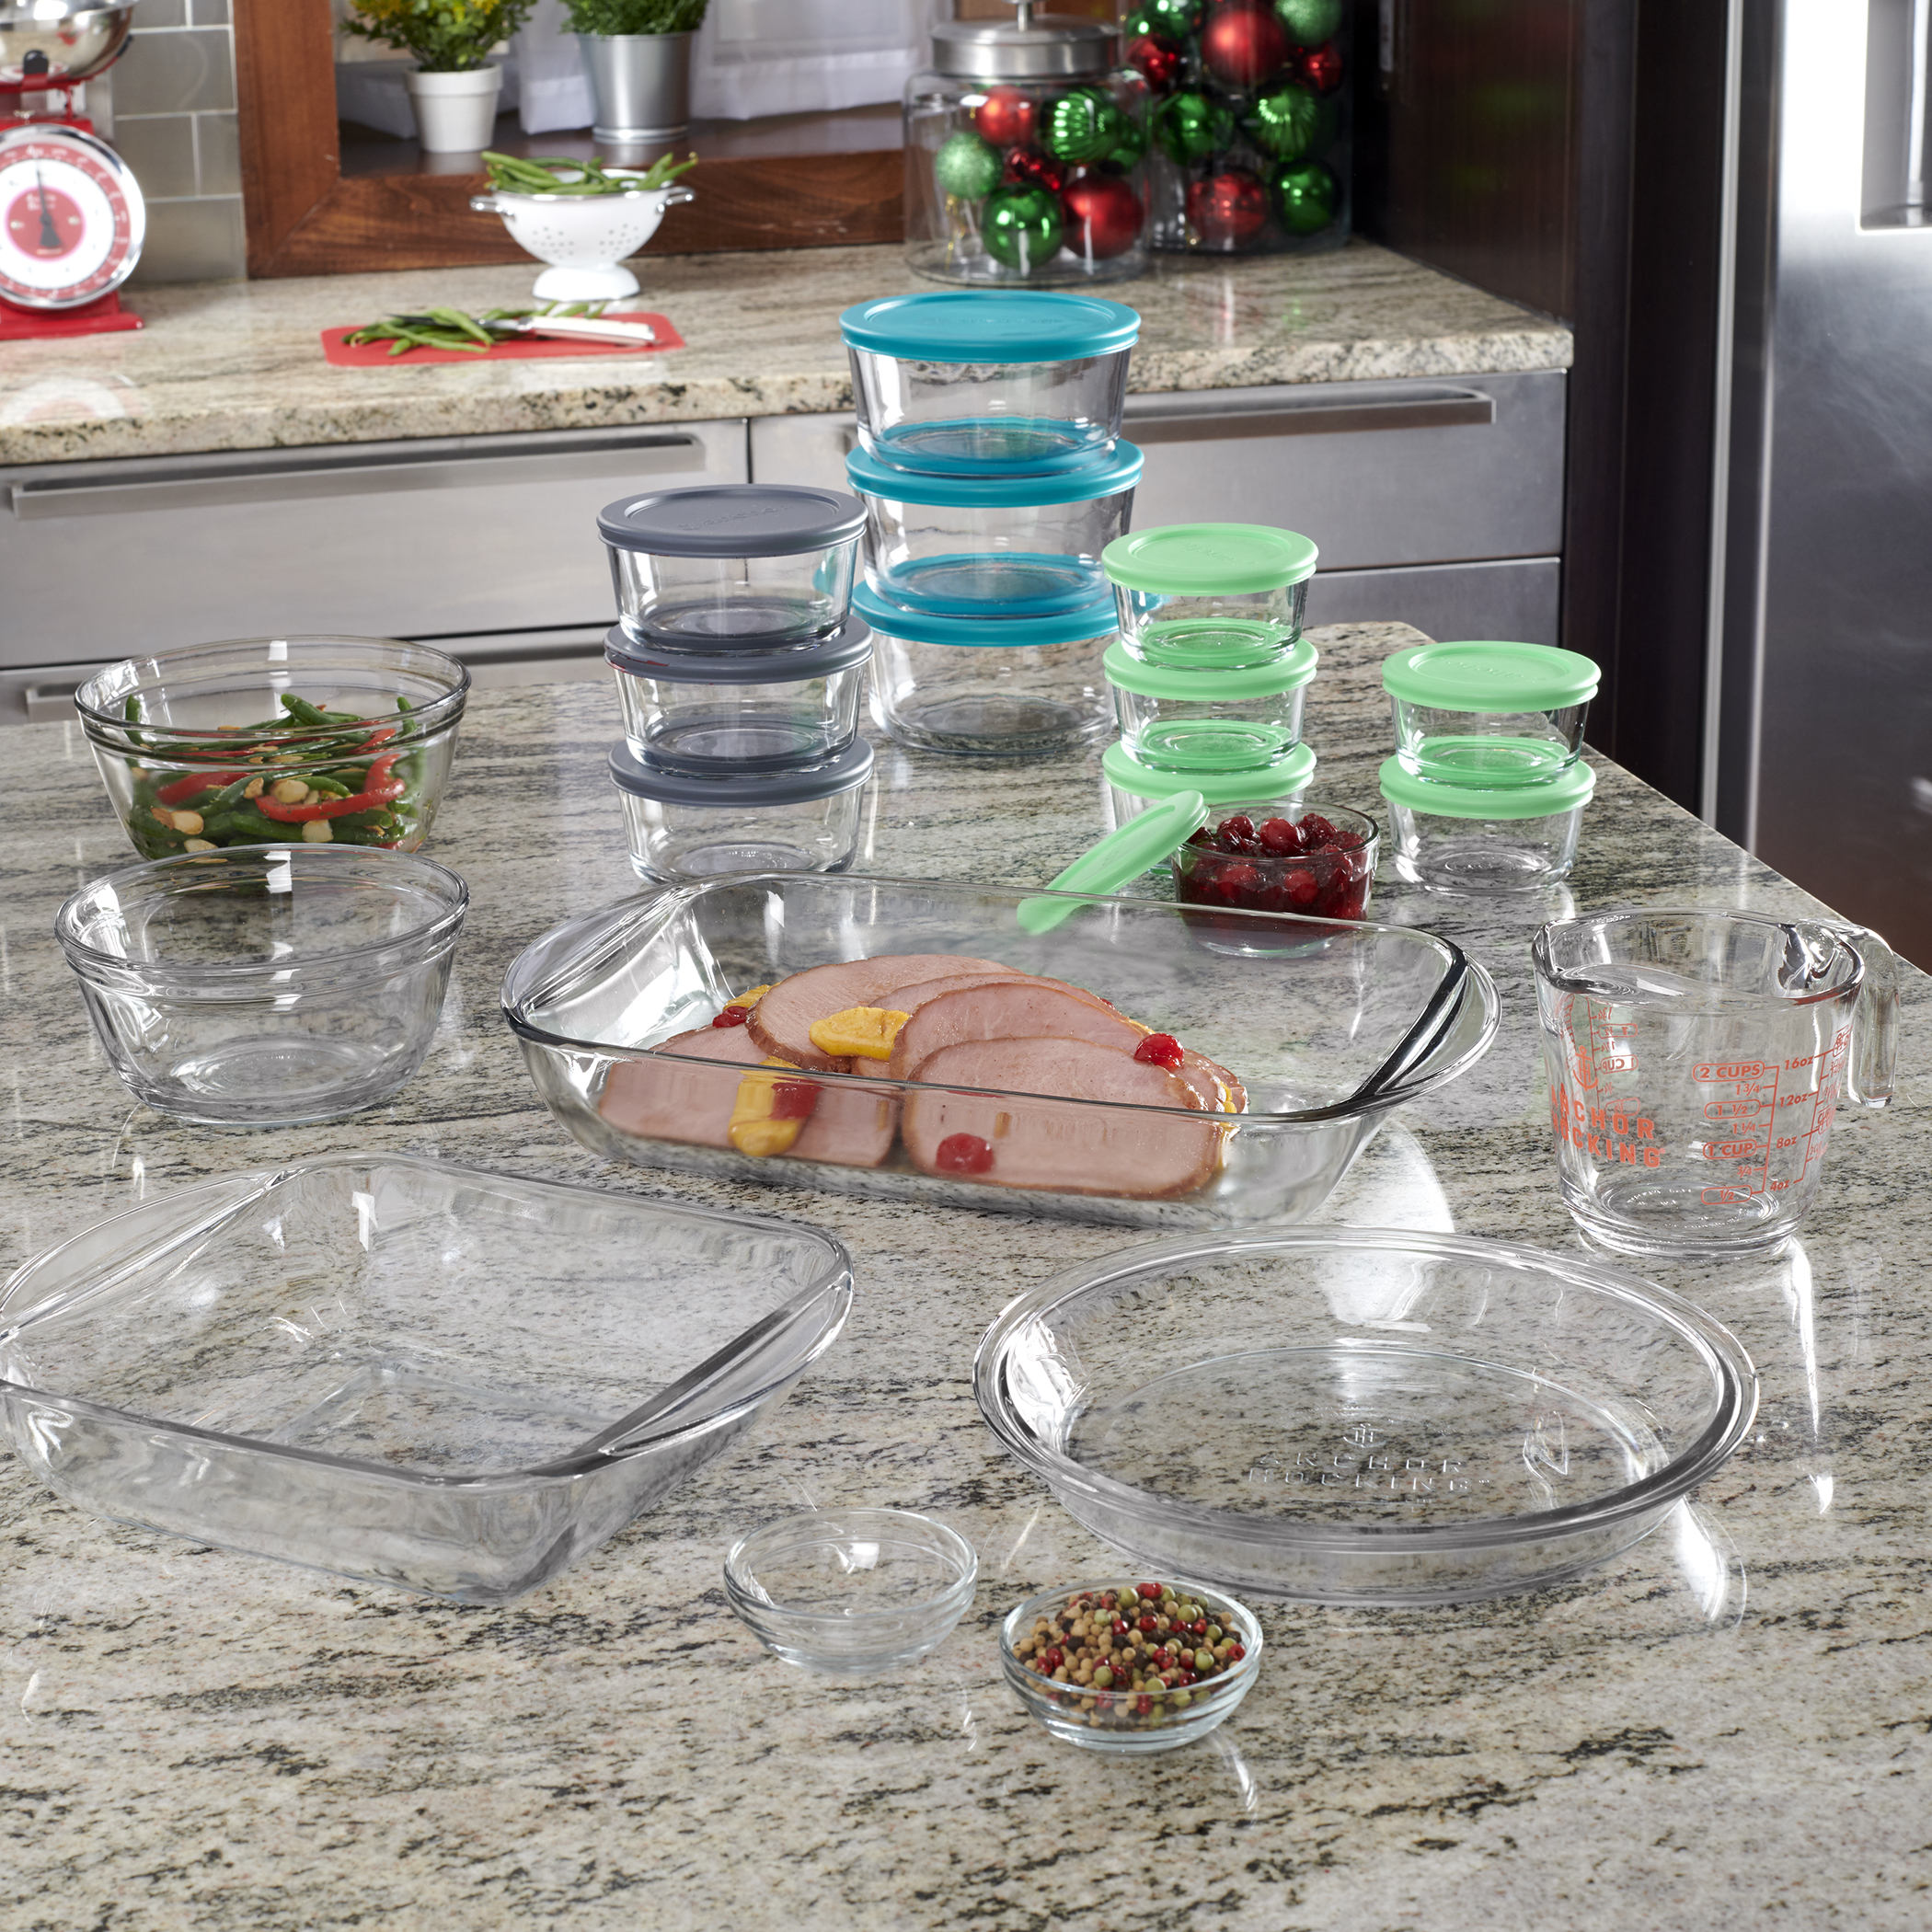 Anchor Hocking Glass Food Storage Containers & Glass Baking Dishes, 32 Piece Set - image 2 of 6